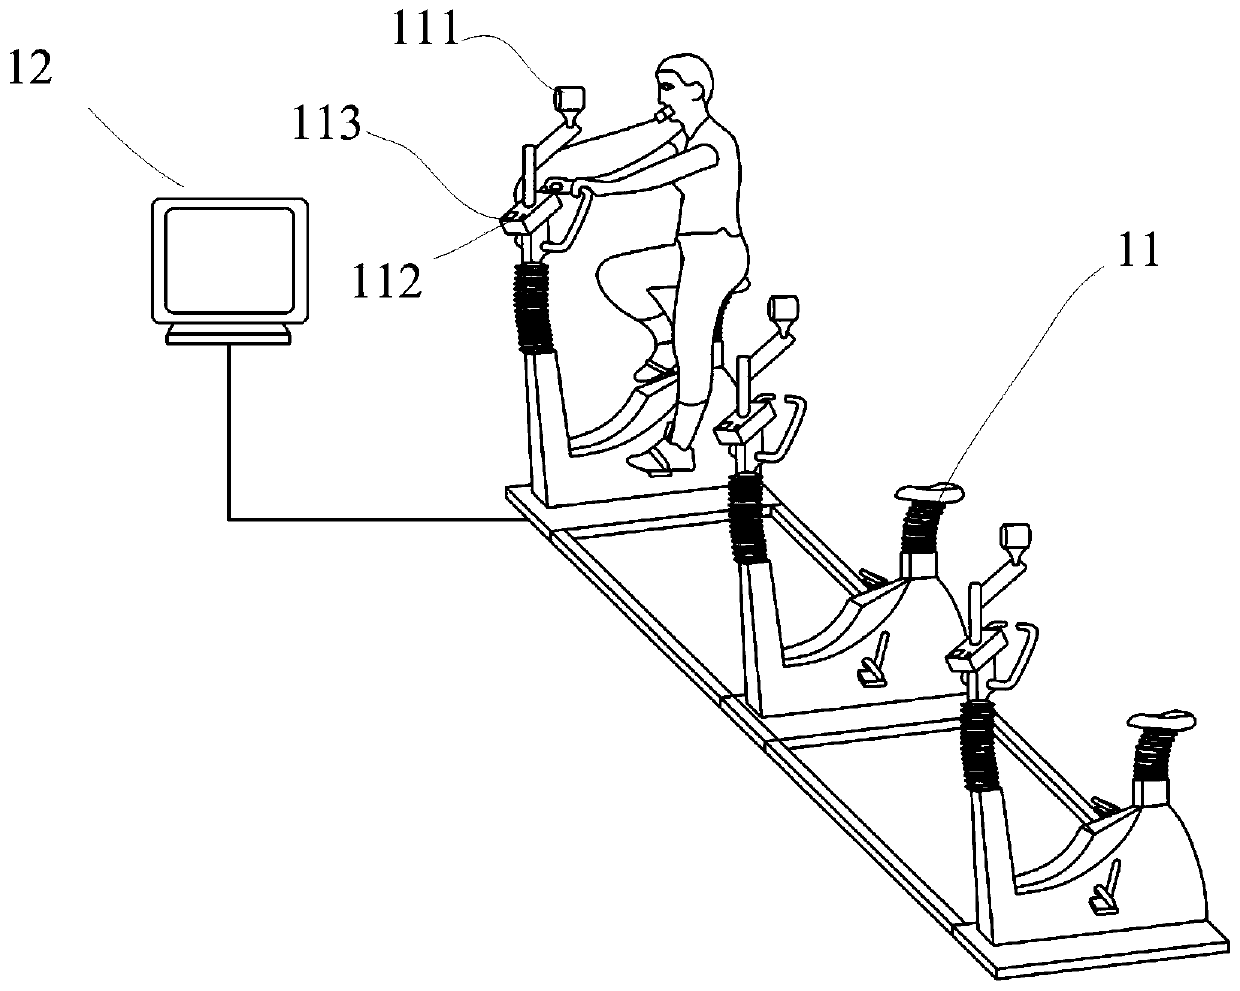 Bicycle training exercise system based on integral theory guidance